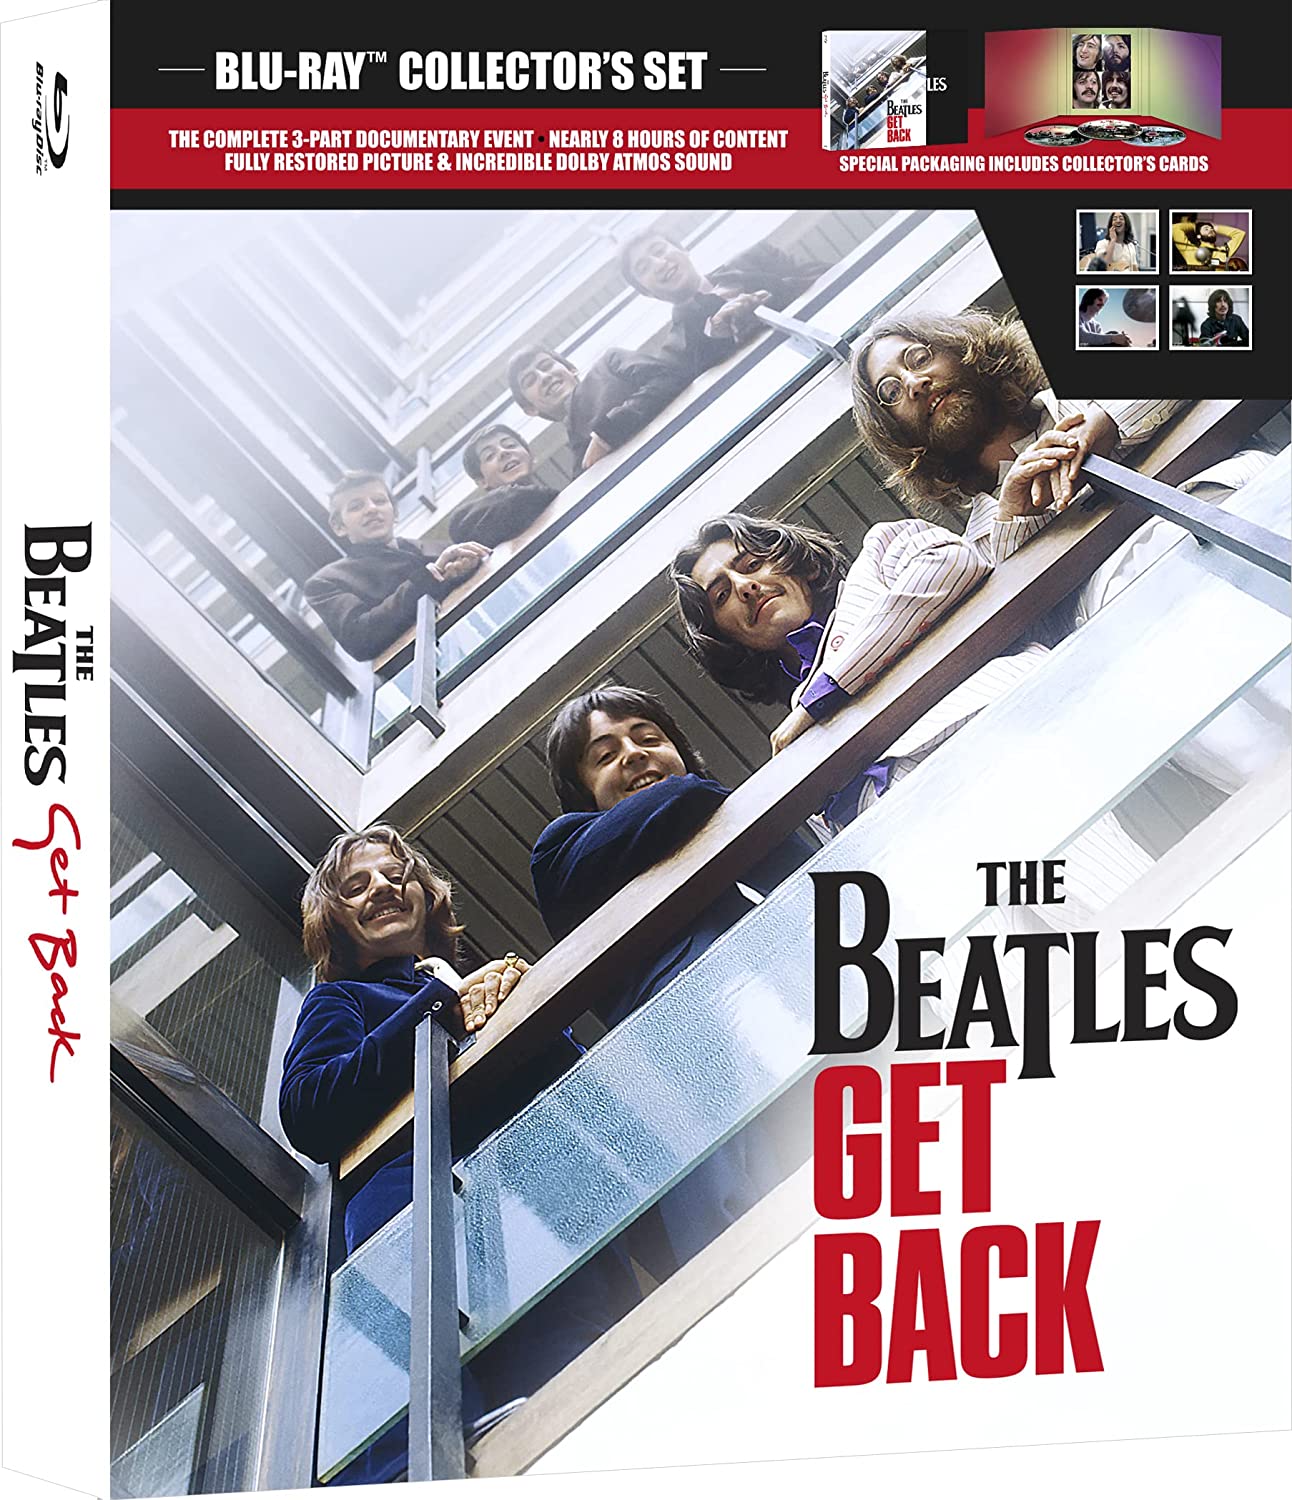 The Beatles- Get Back Blu-ray Collectors Set